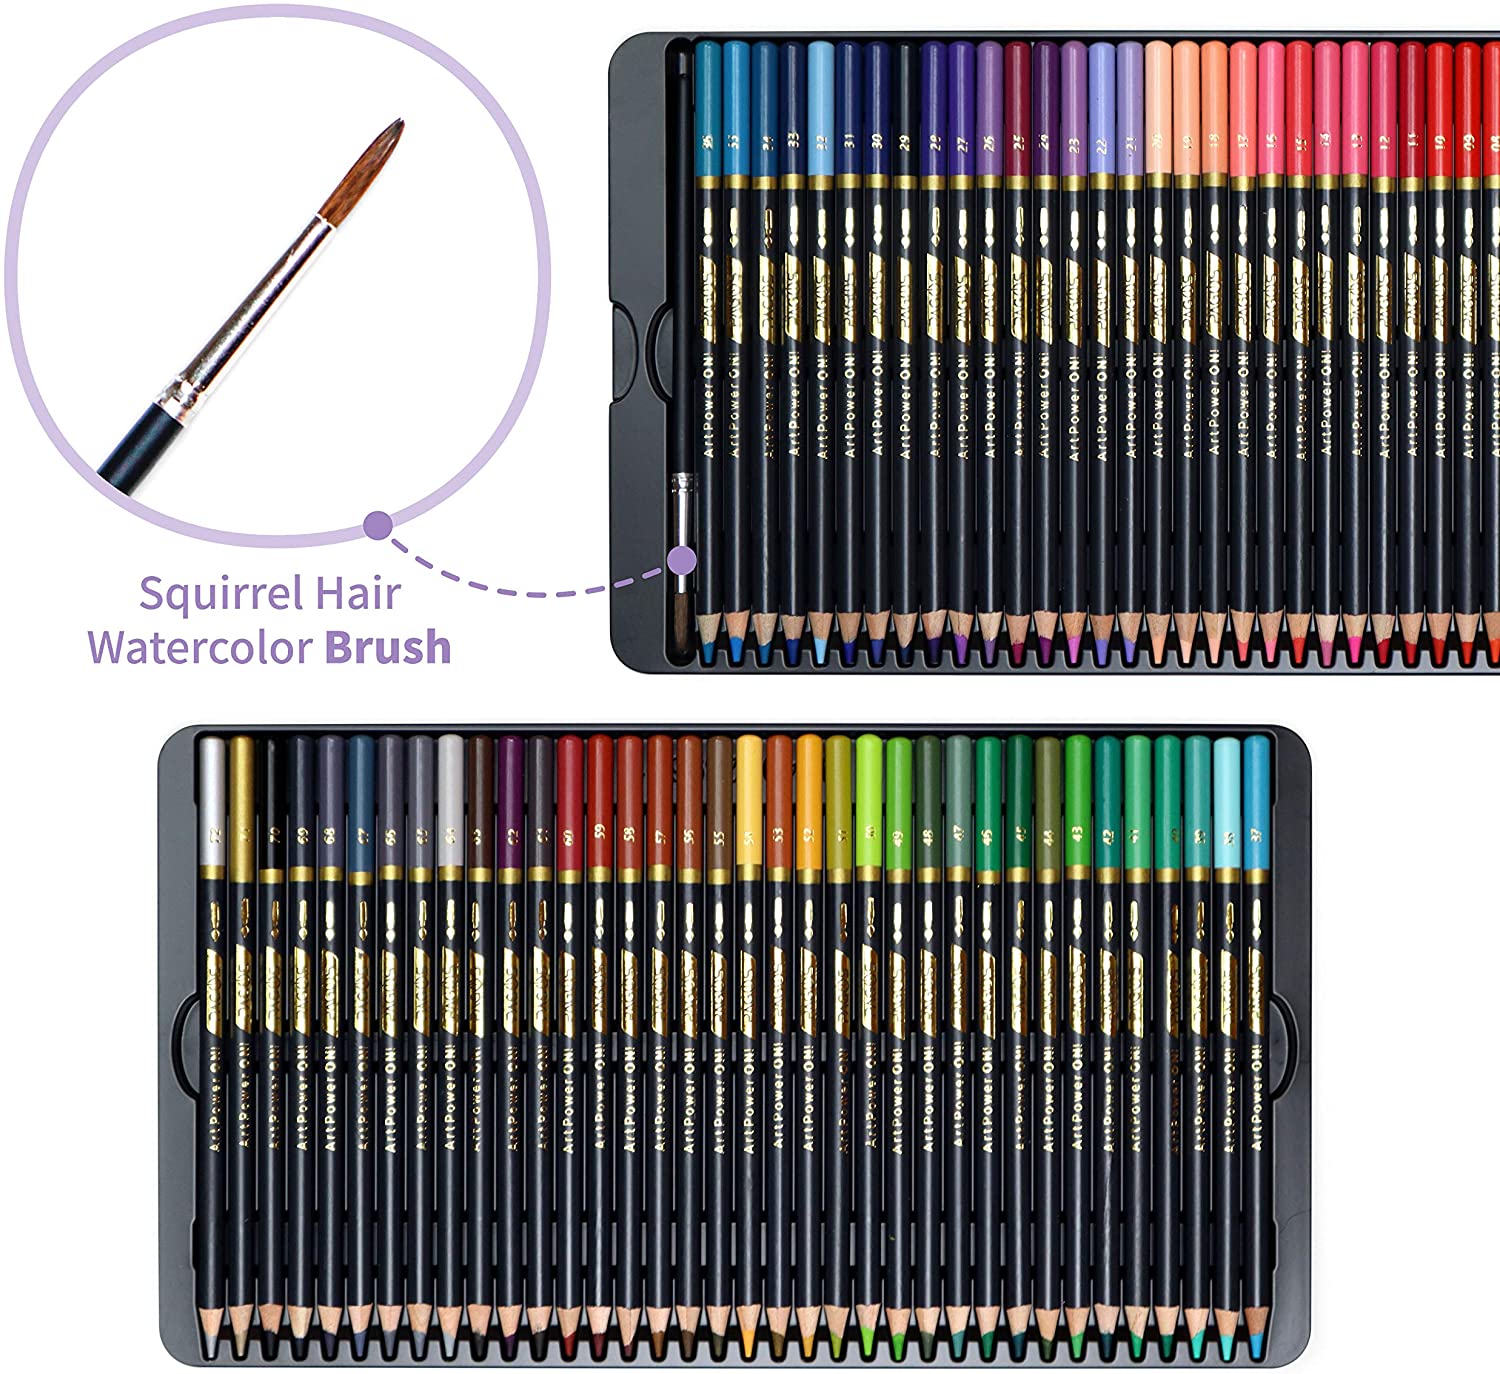 72 Professional Watercolor Pencils Art Drawing Numbered Soluble Pencil Set